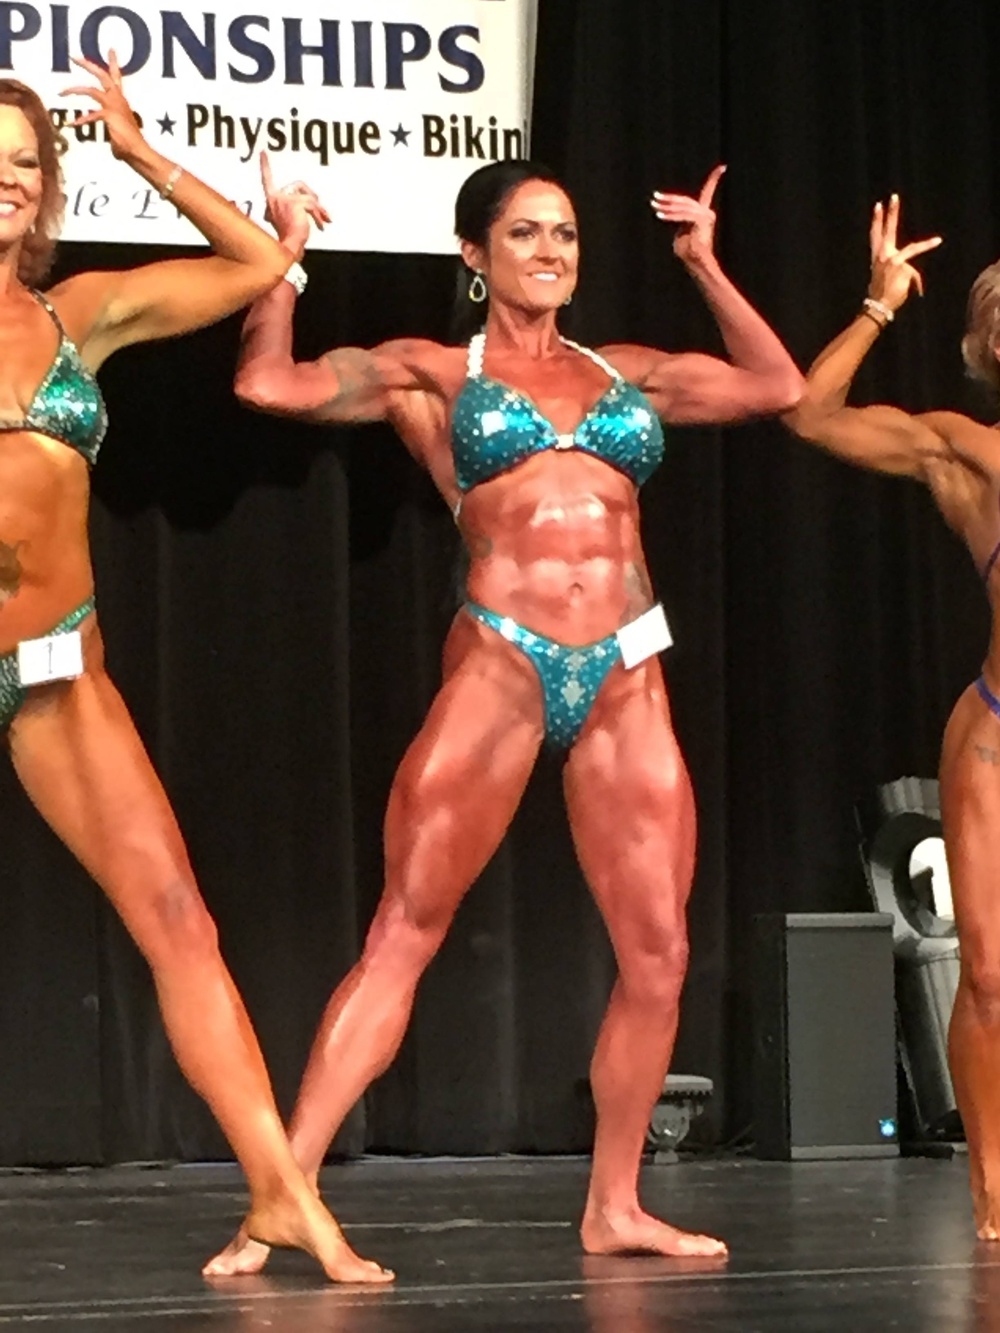 Marine, Mom makes gains, wins local competition